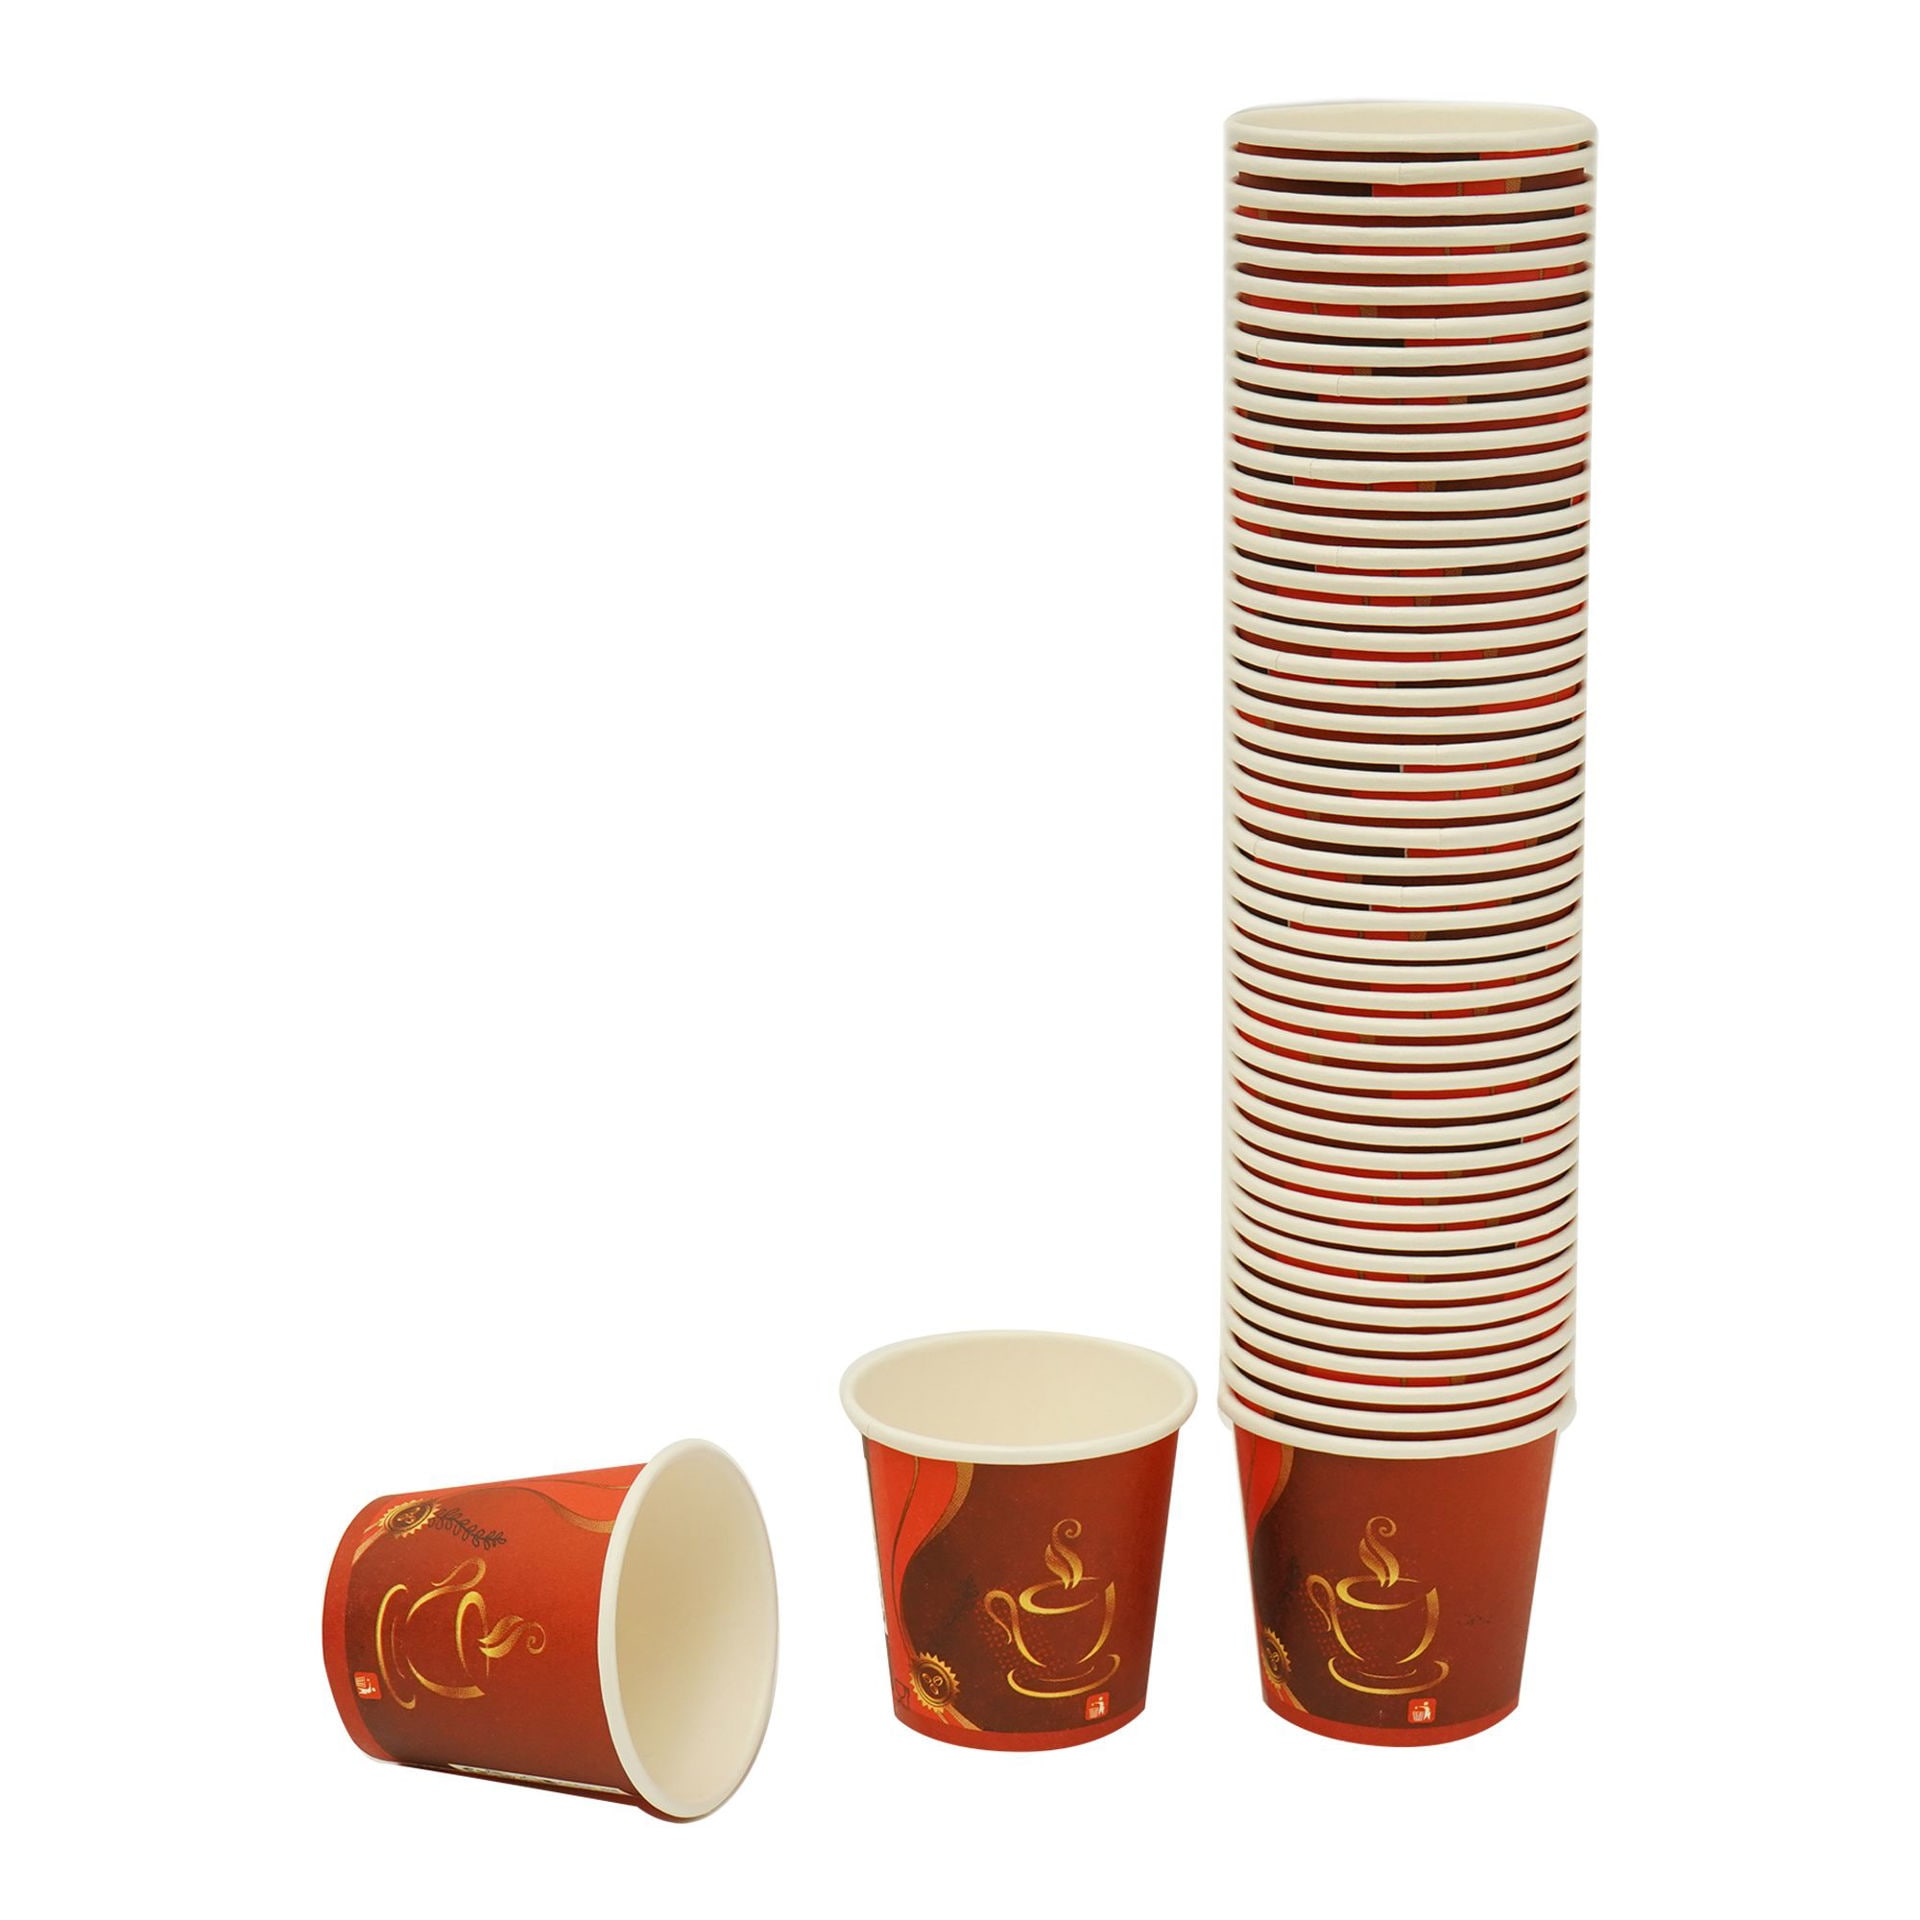 Shop IDEAL PACK Ideal Pack Disposable Paper Cups, 4oz, Pack of